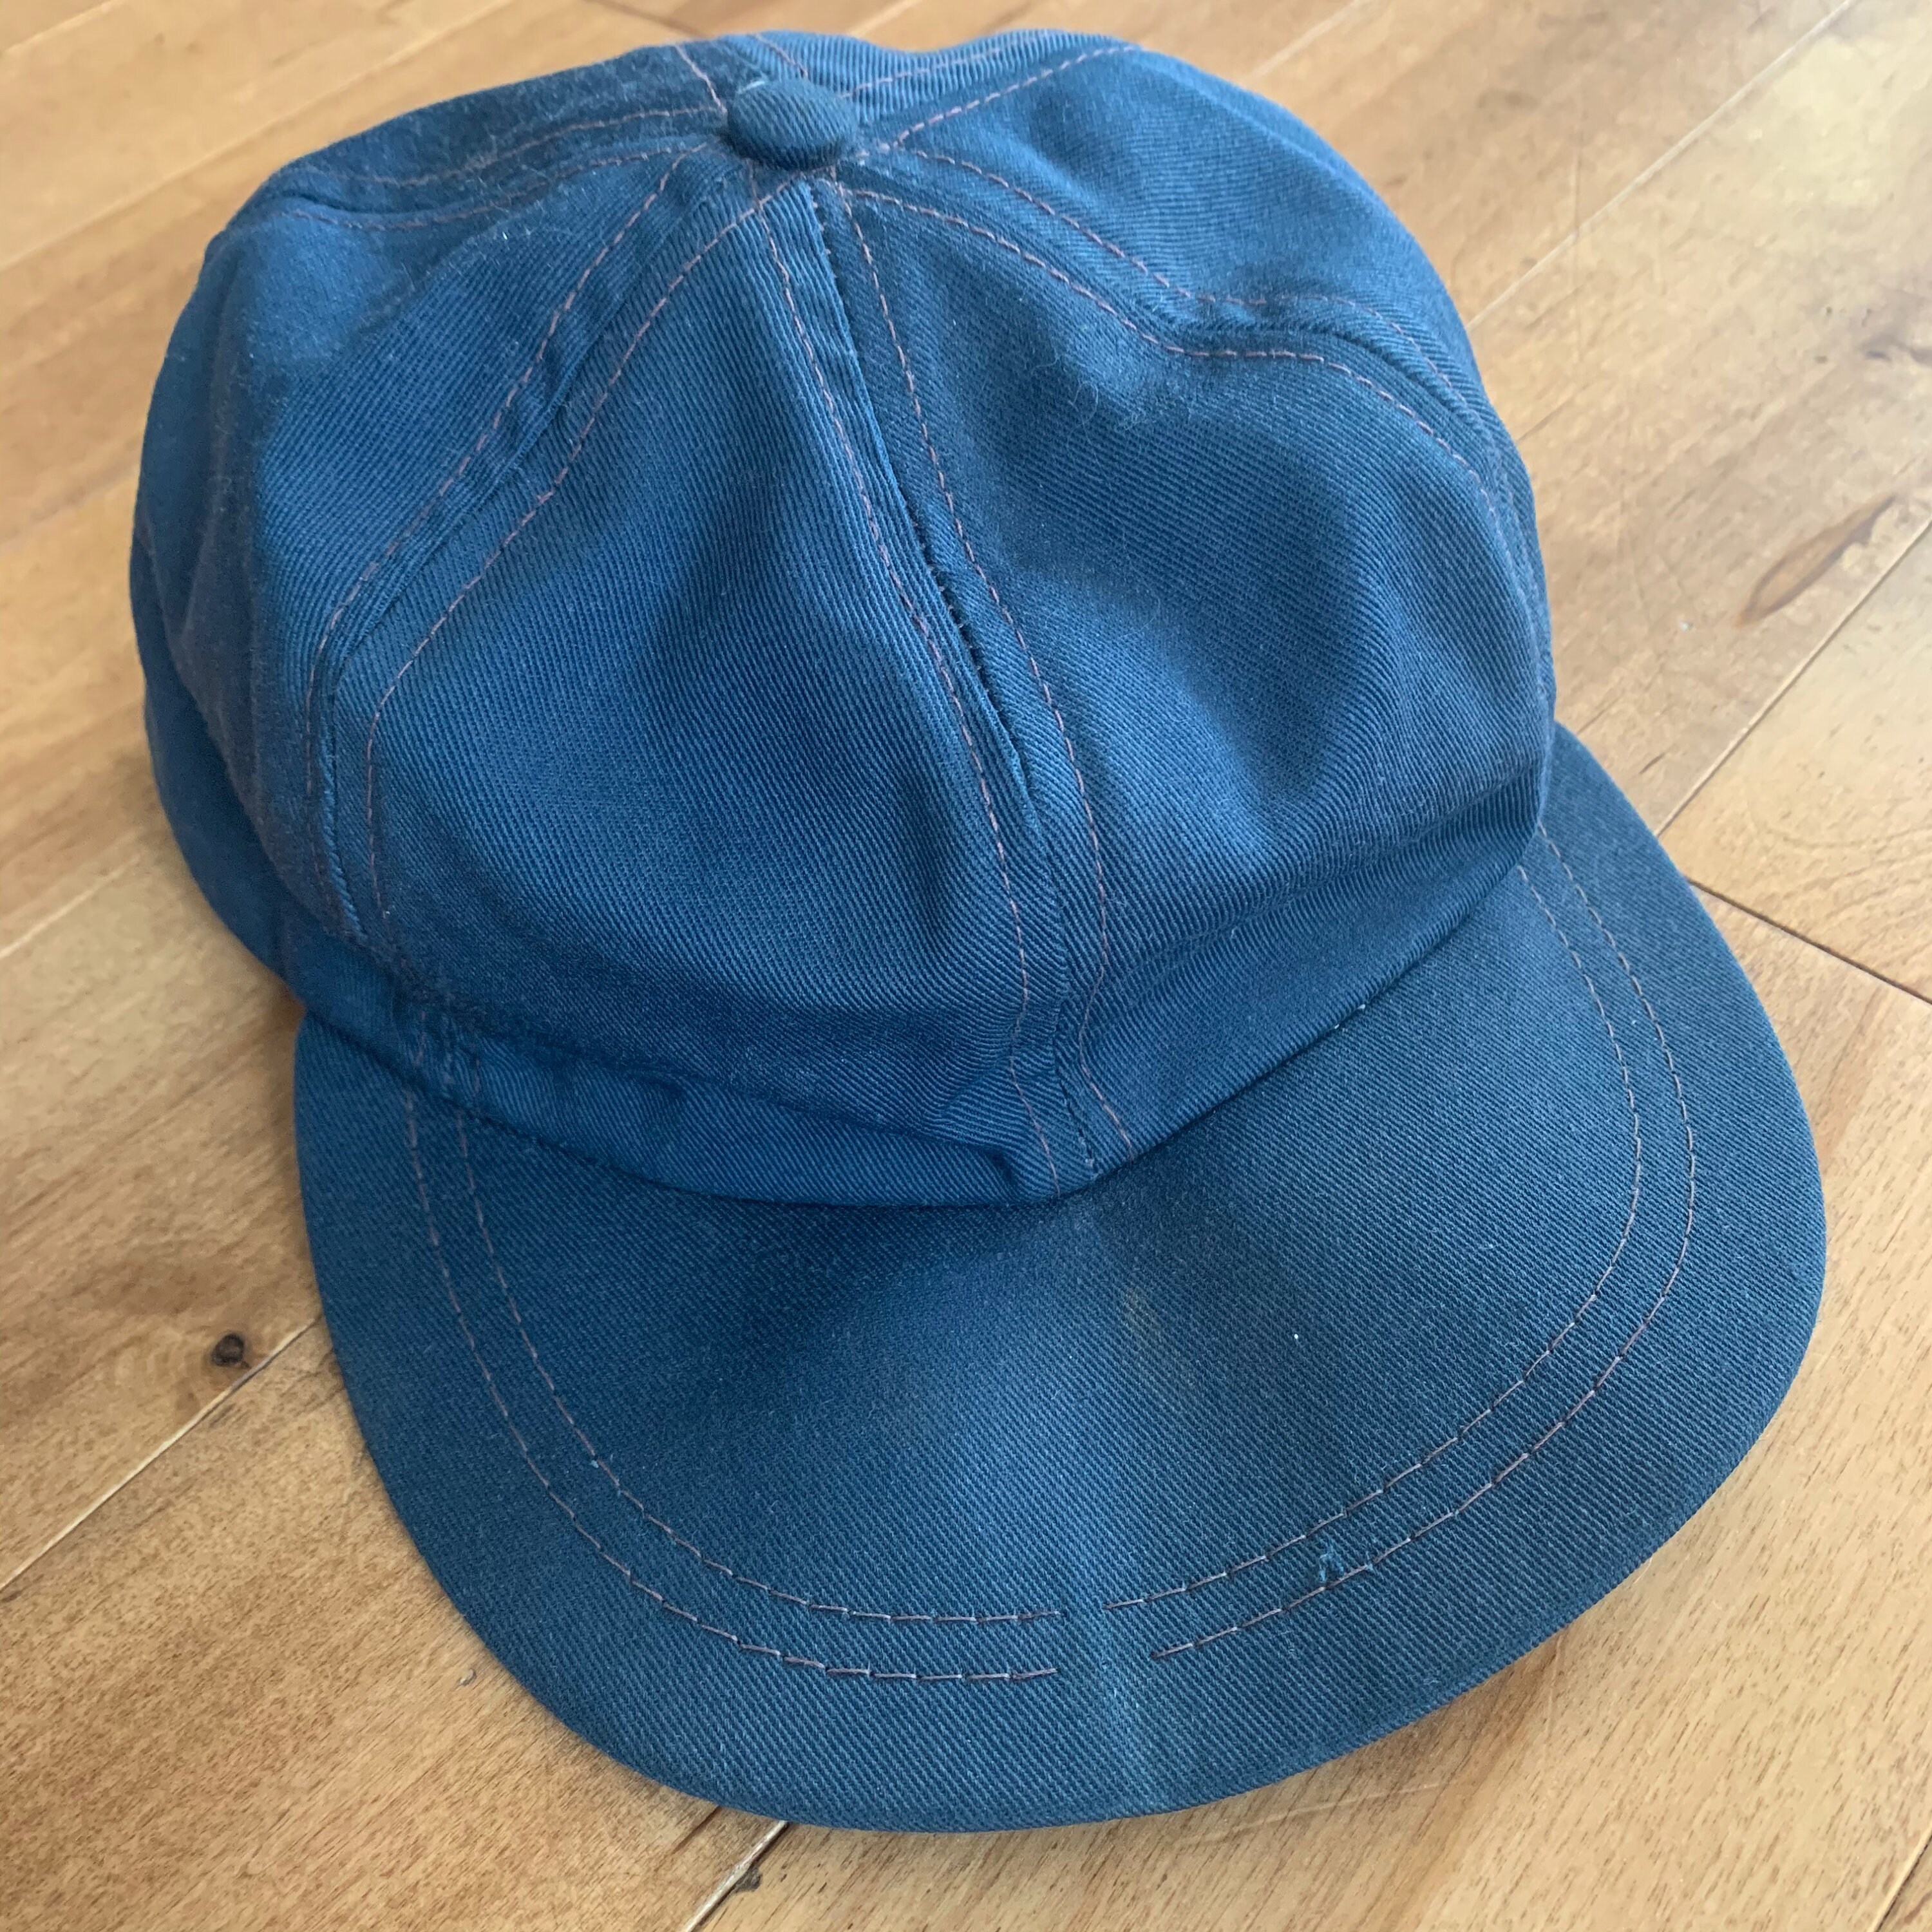 90s Retro Fitted Cap Vintage 1990s Blue Contrast Stitching | Etsy